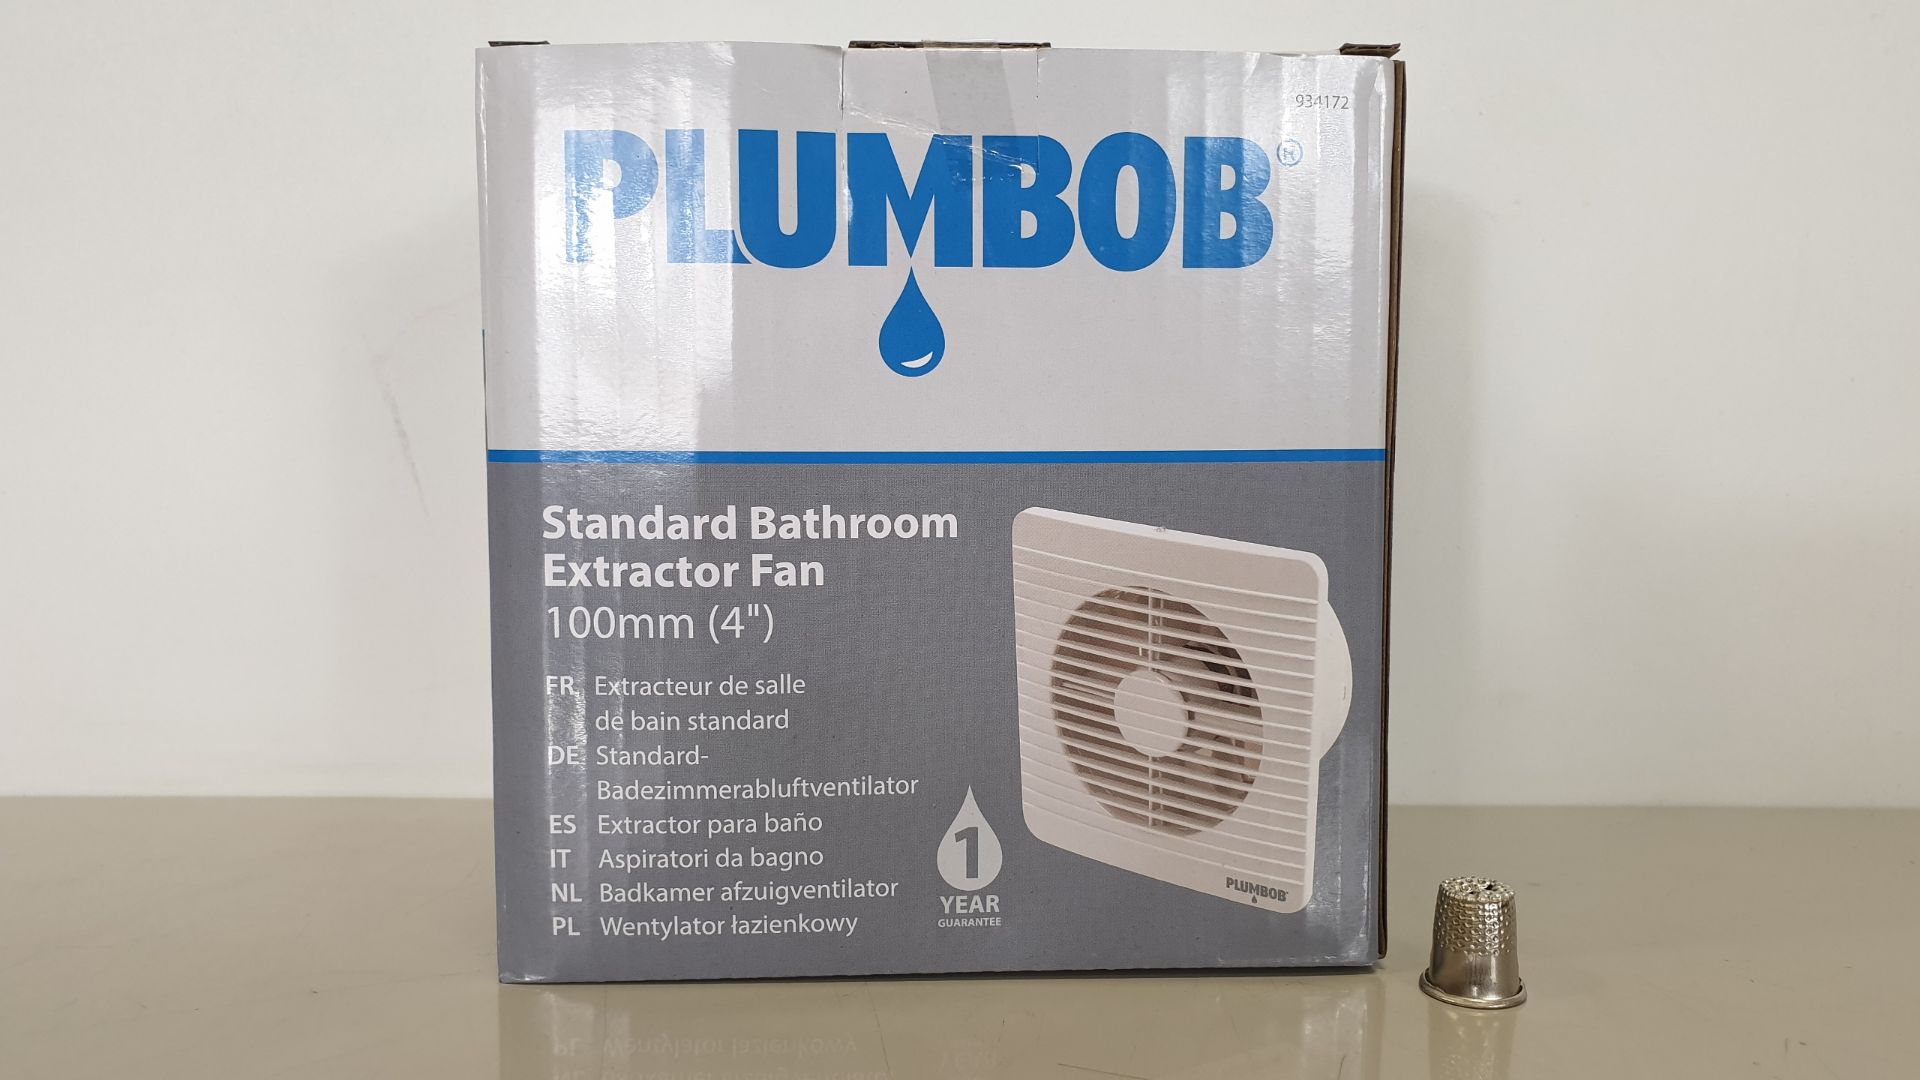 12 X BRAND NEW PLUMBOB STANDARD BATHROOM EXTRACTOR FANS 100MM (4") WITH LOW 45dBA NOISE LEVEL (